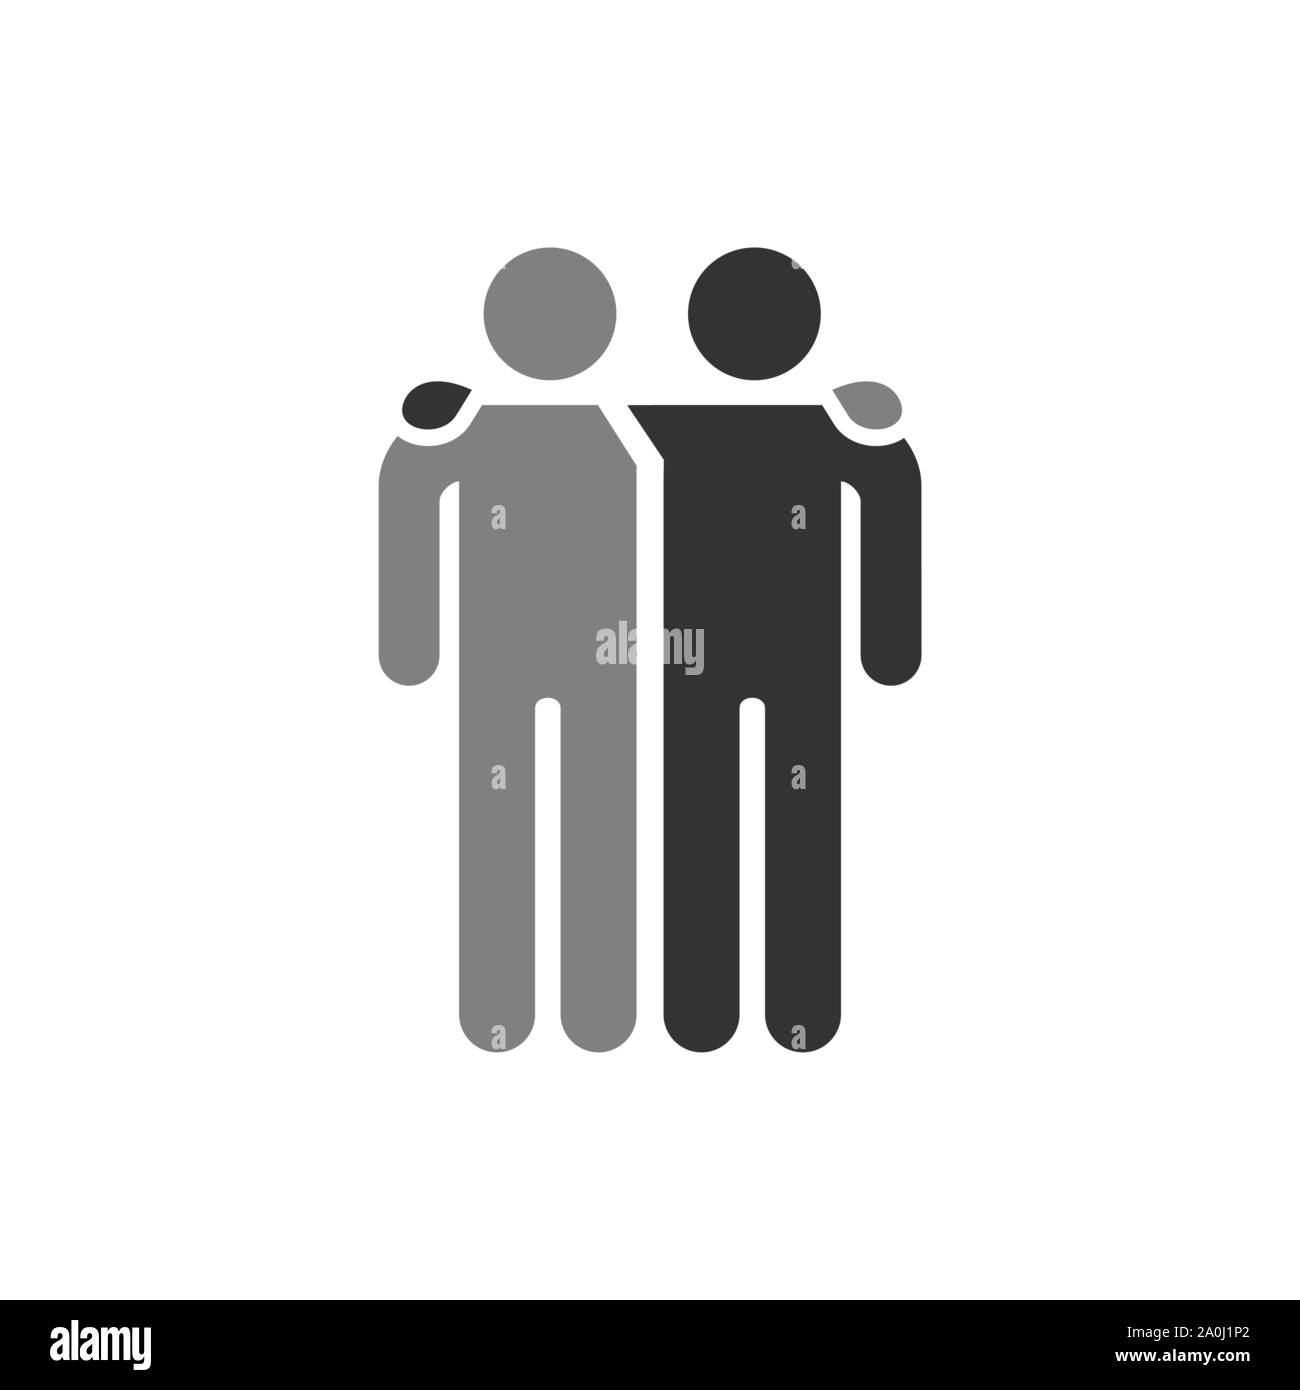 Friends icon Black and White Stock Photos & Images - Alamy